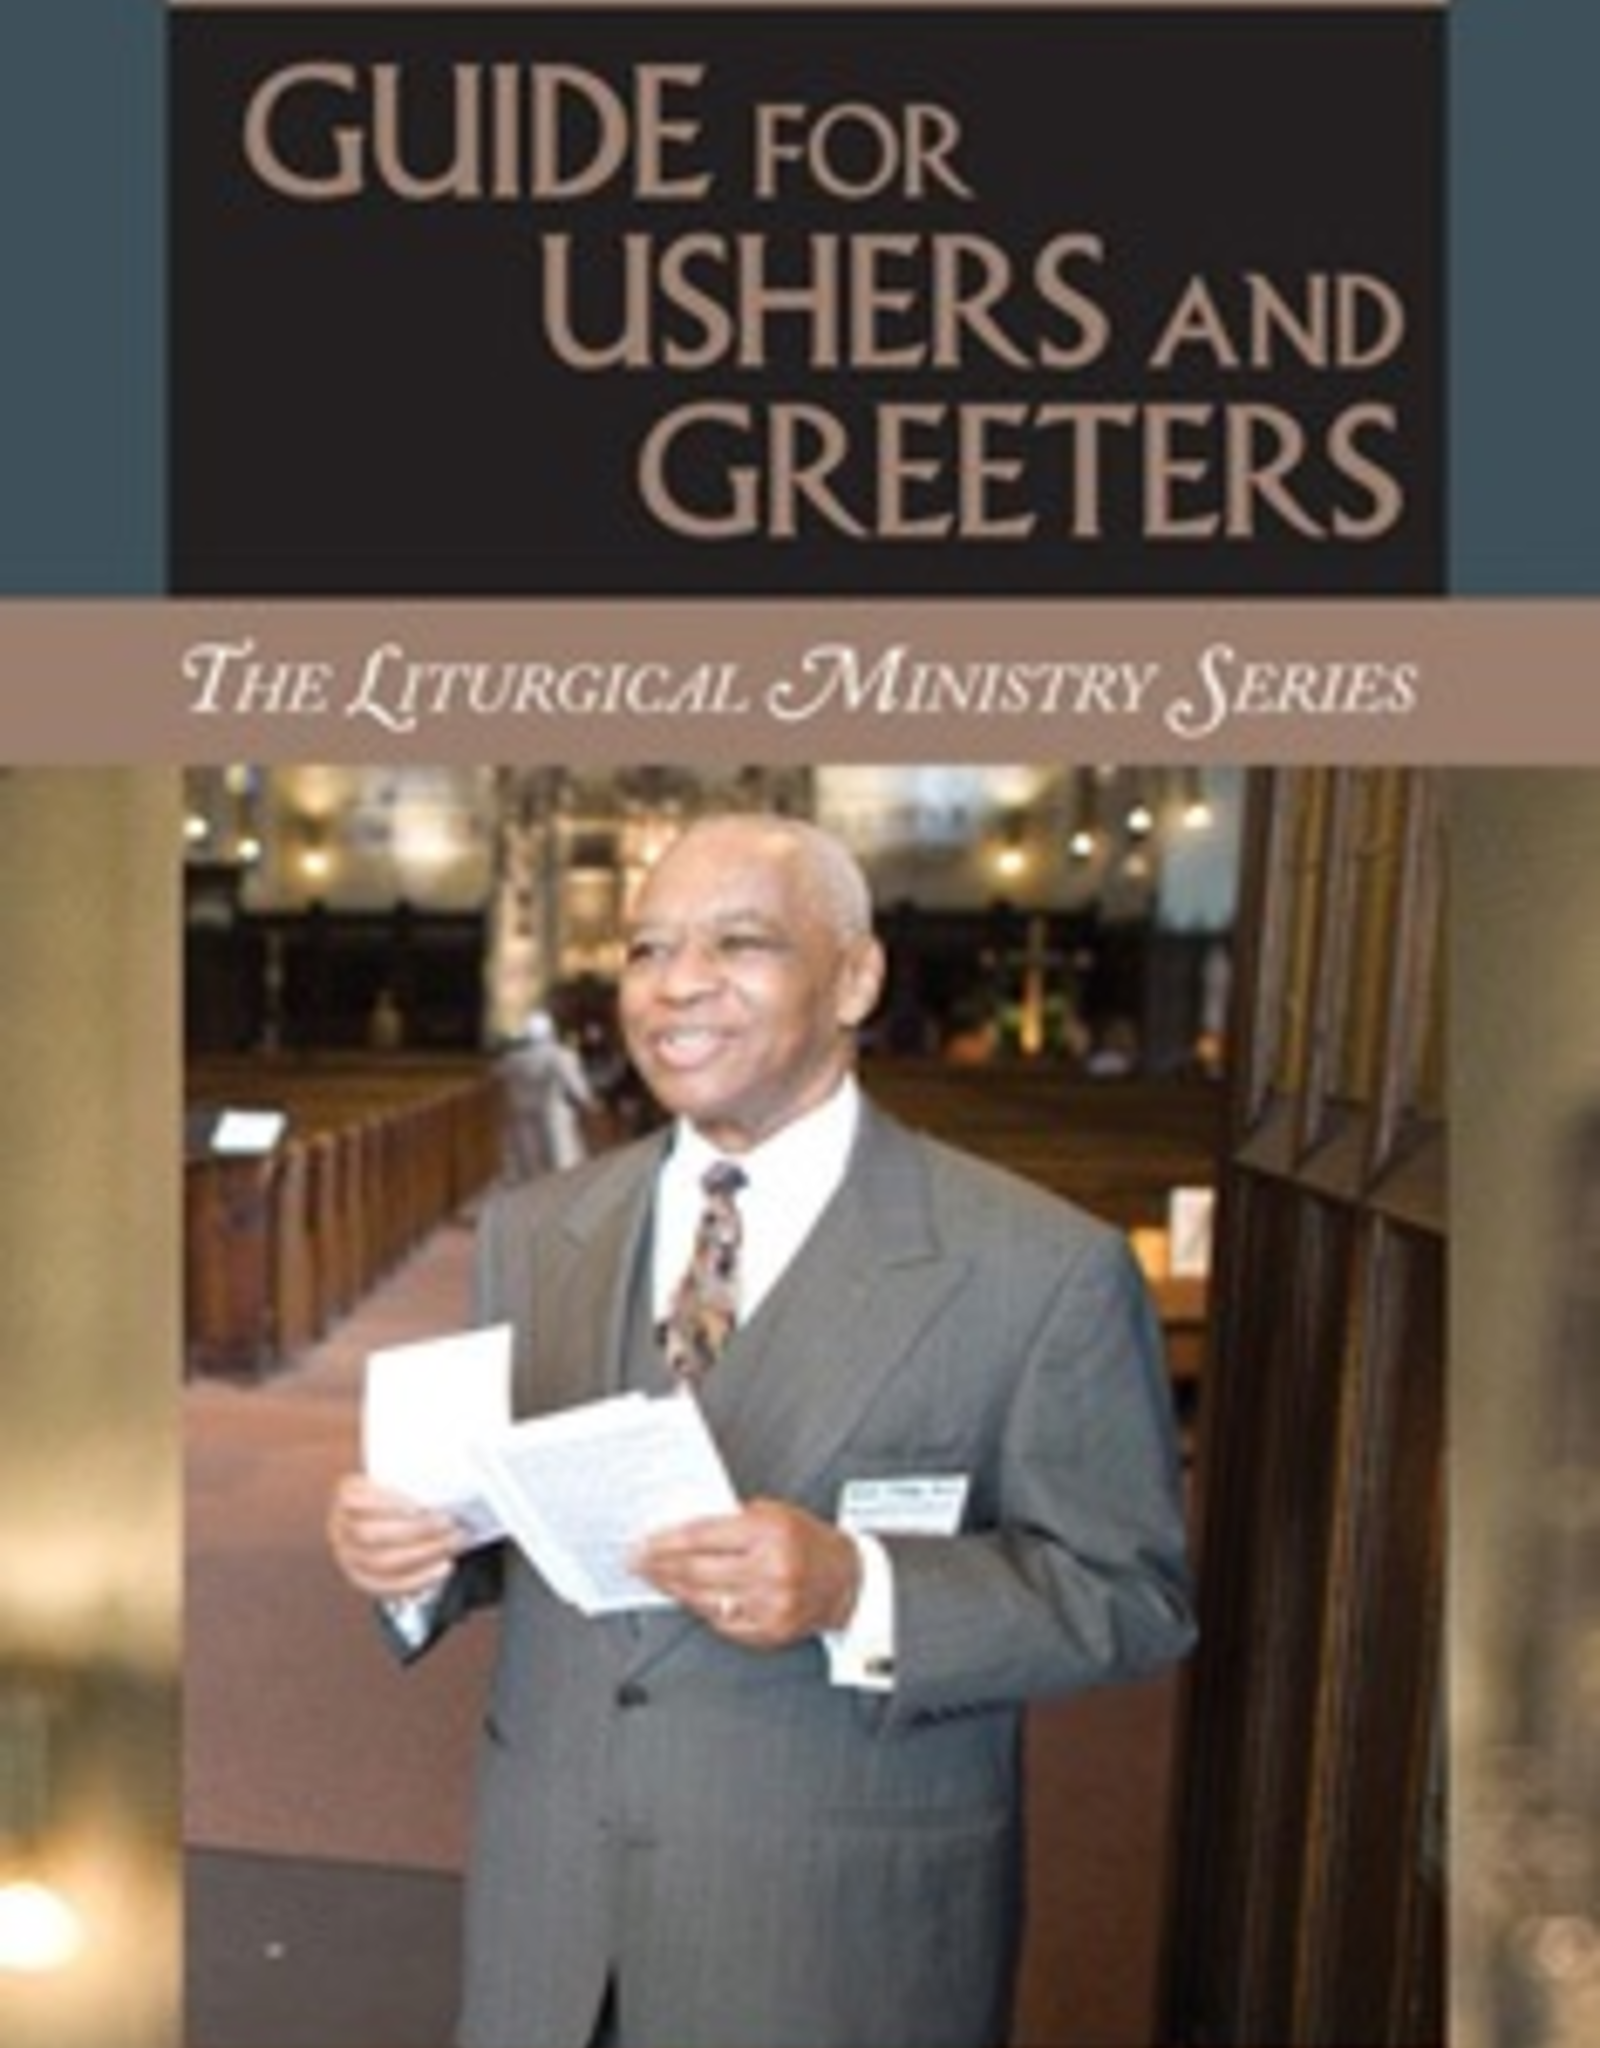 Liturgical Training Press Guide for Ushers and Greeters, by Paul Turner, Karie Ferrell